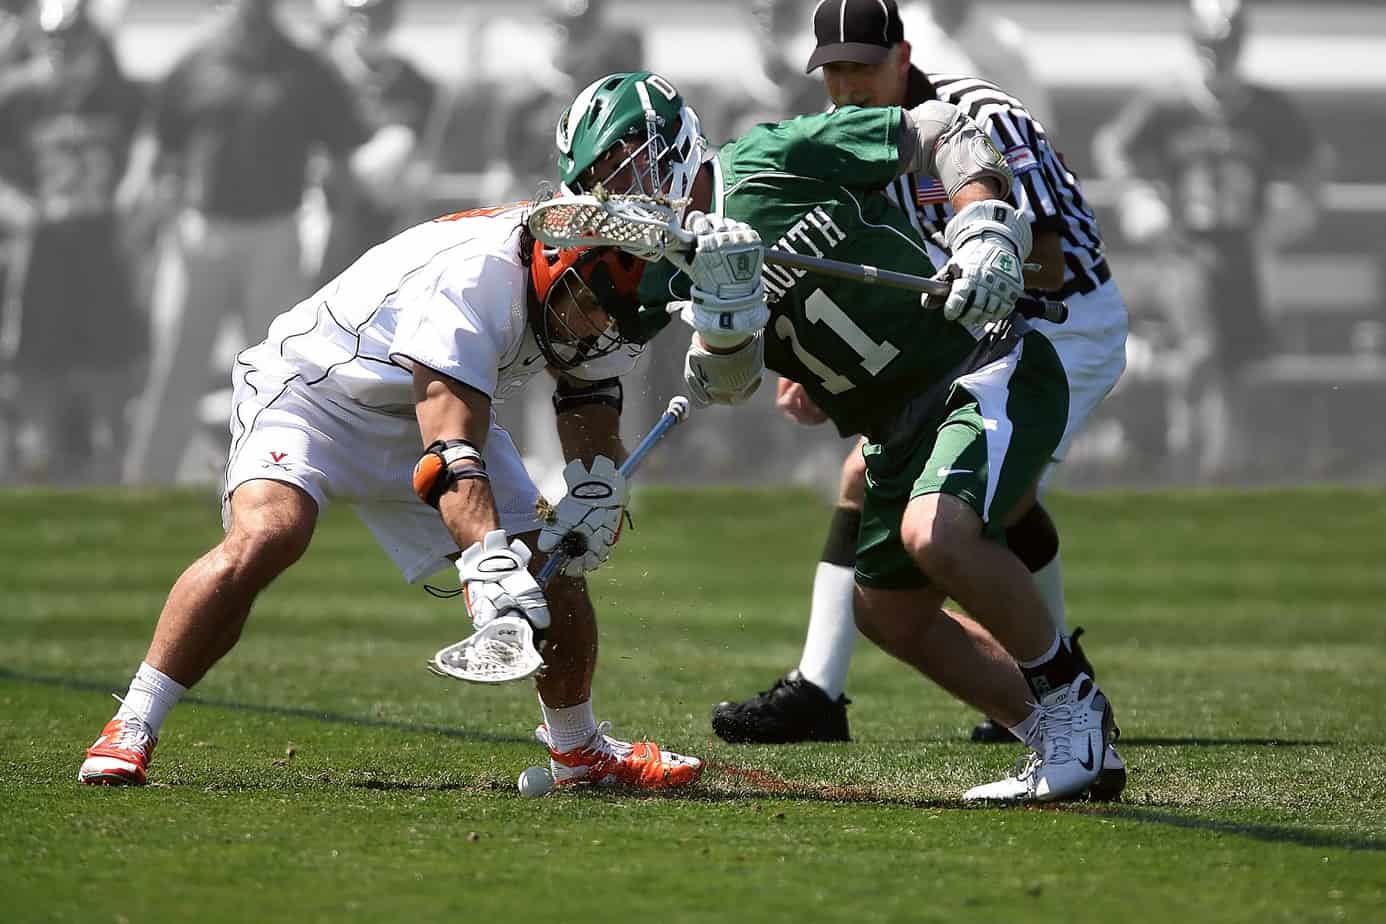 Lacrosse Vs. Baseball: What Are The Differences Between Each Sport?